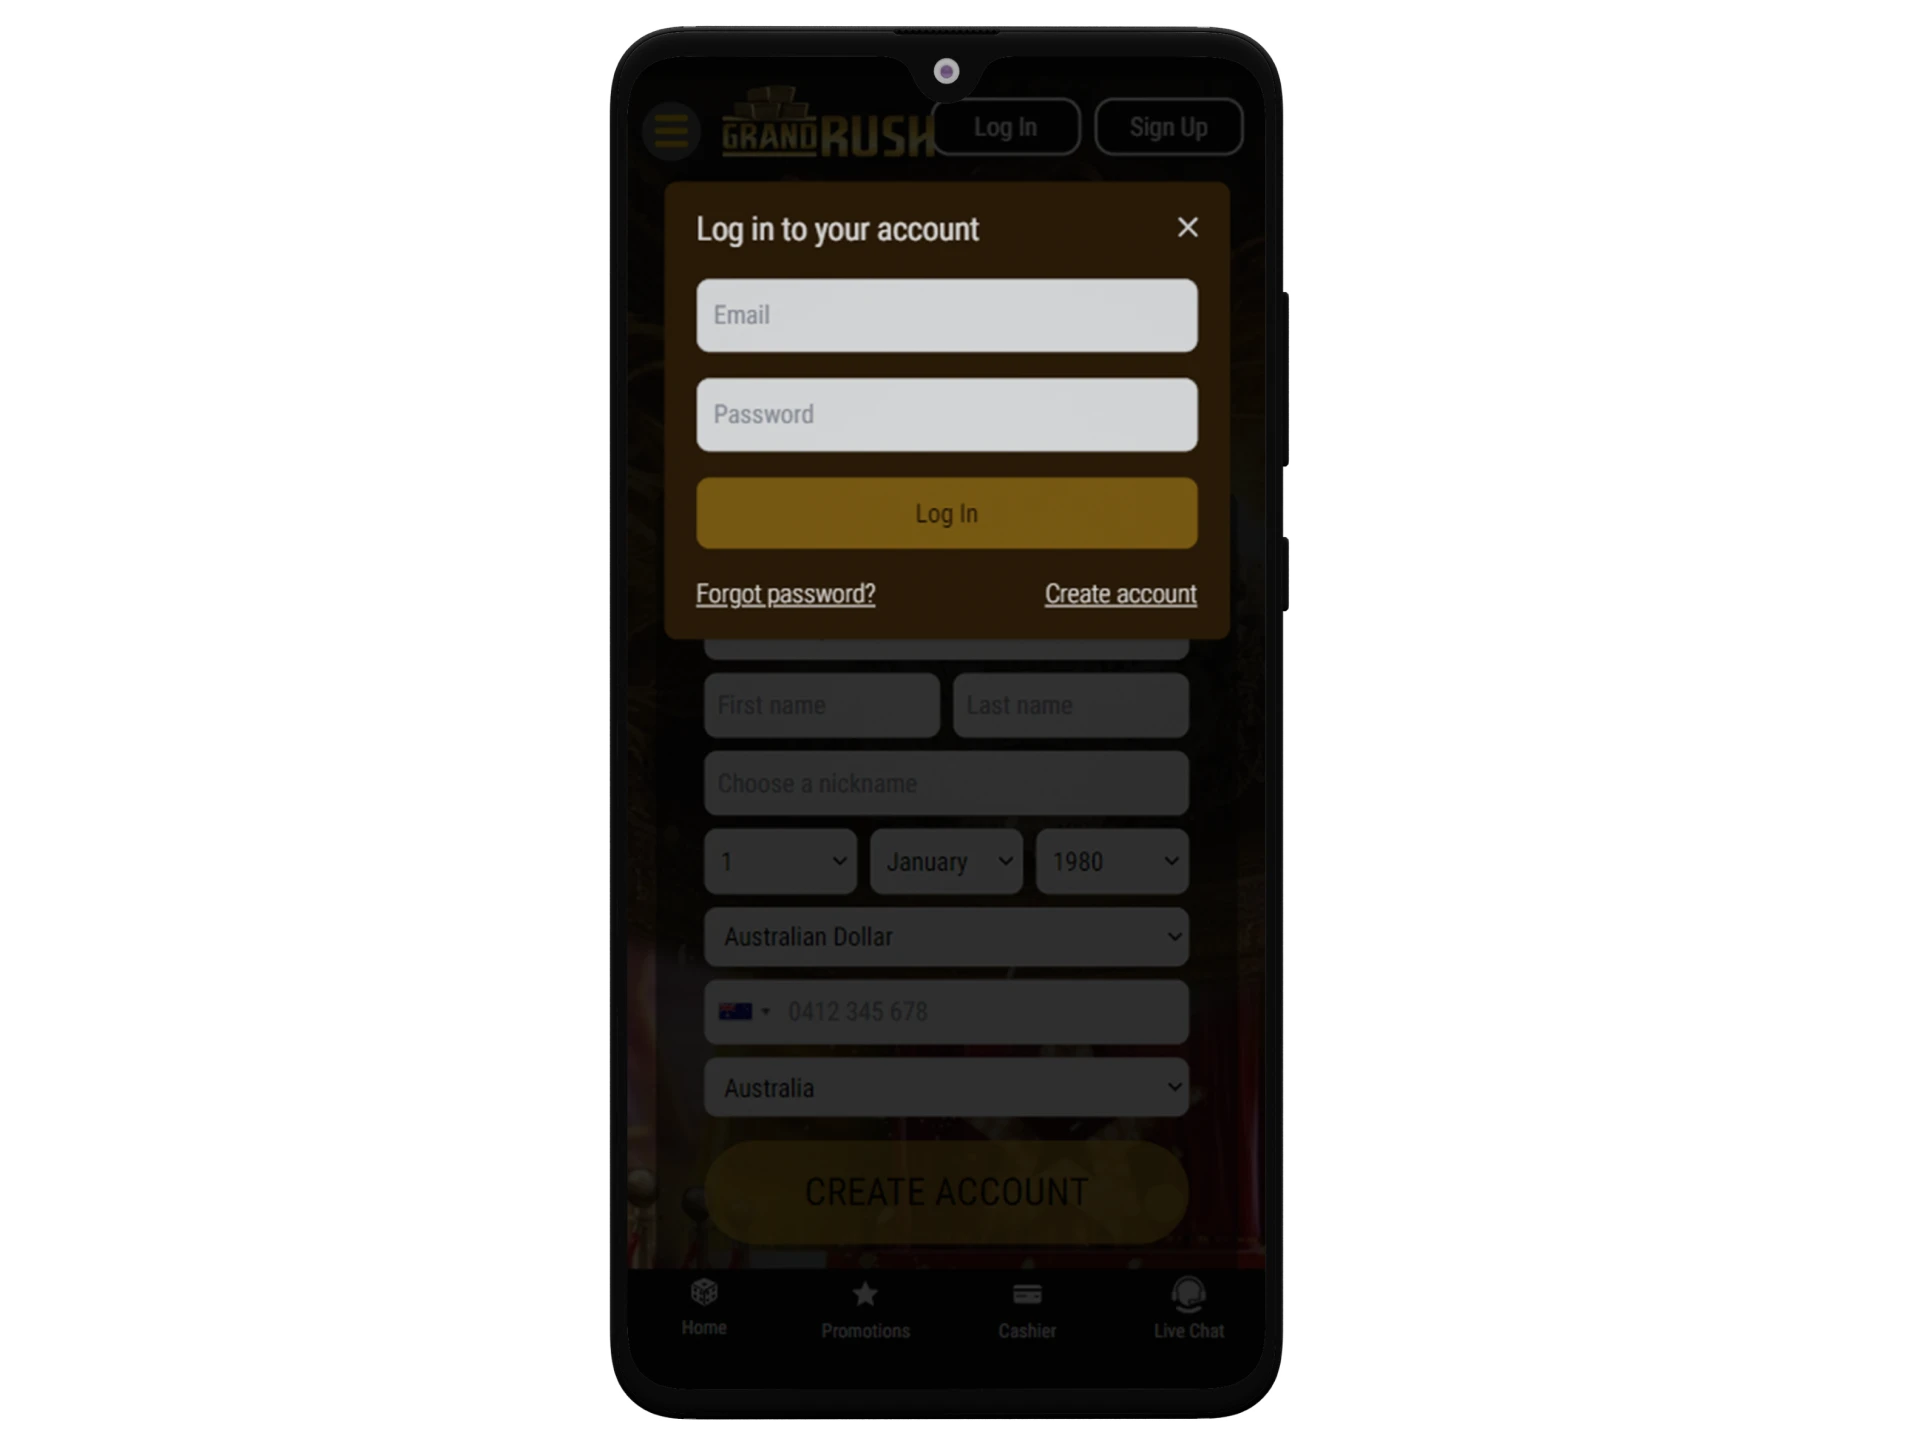 Register or log in at Grand Rush mobile on your Android device.